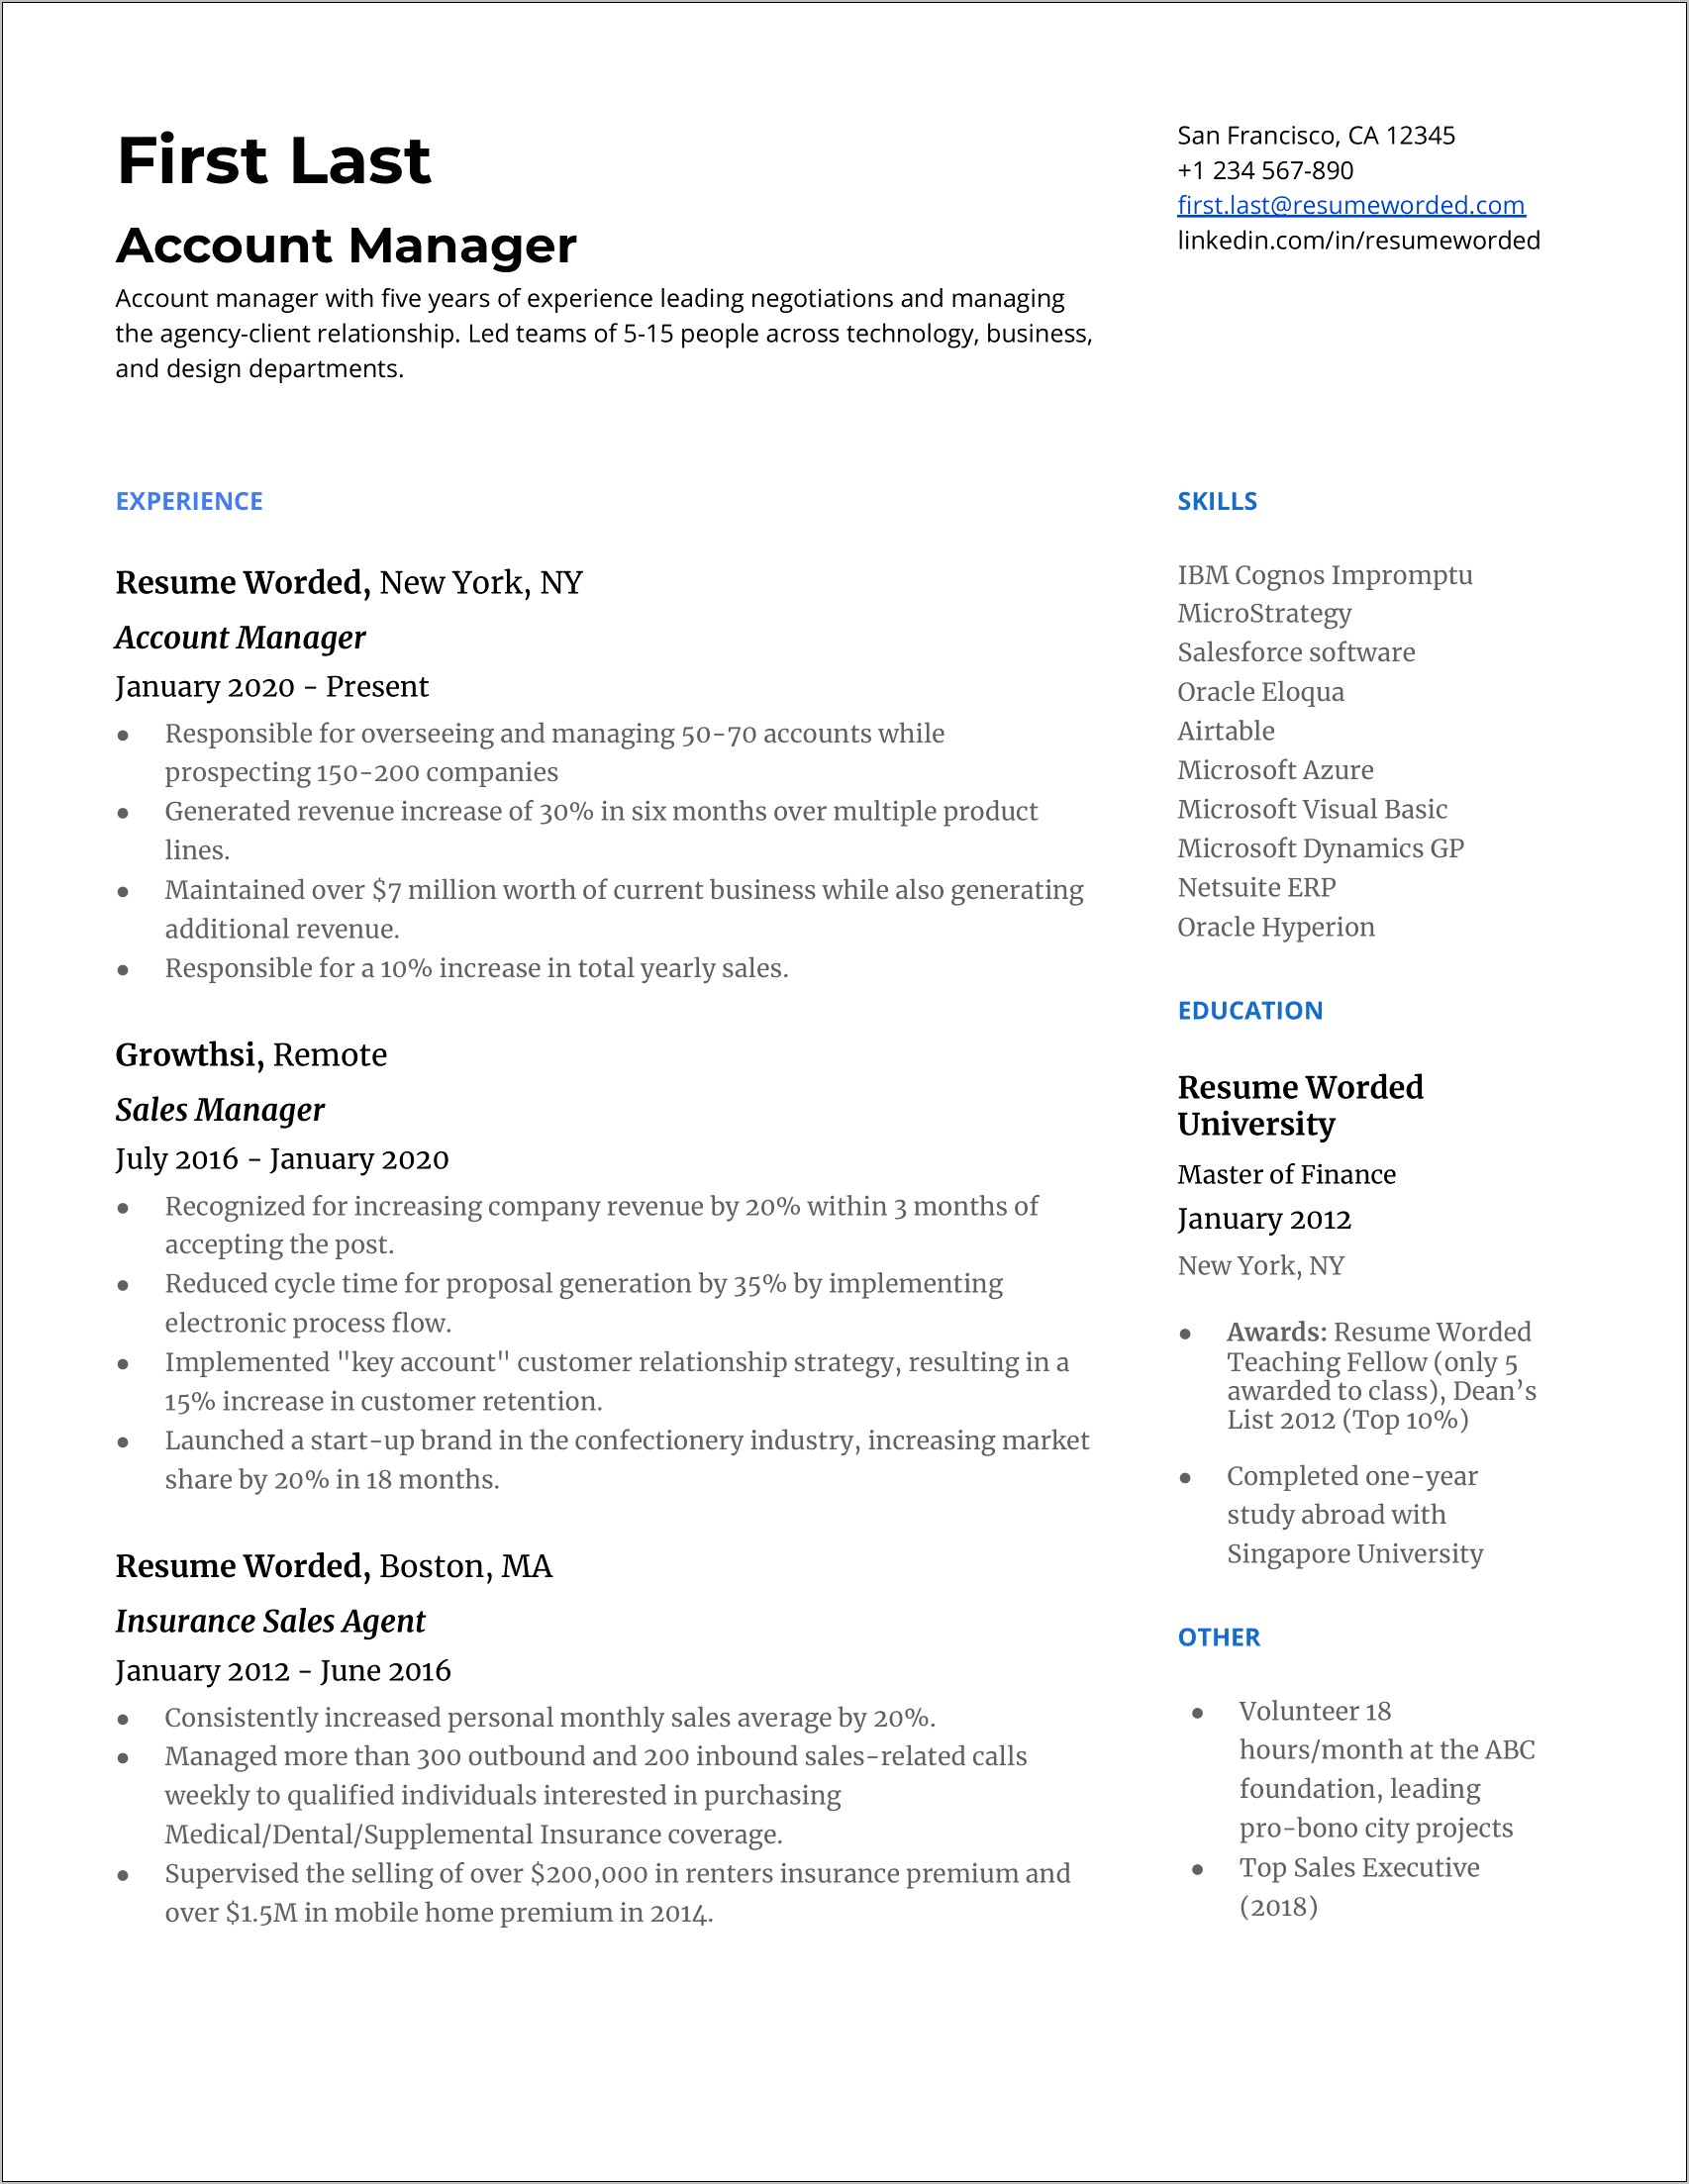 Sample Resume To Say I Have Use Salesforce